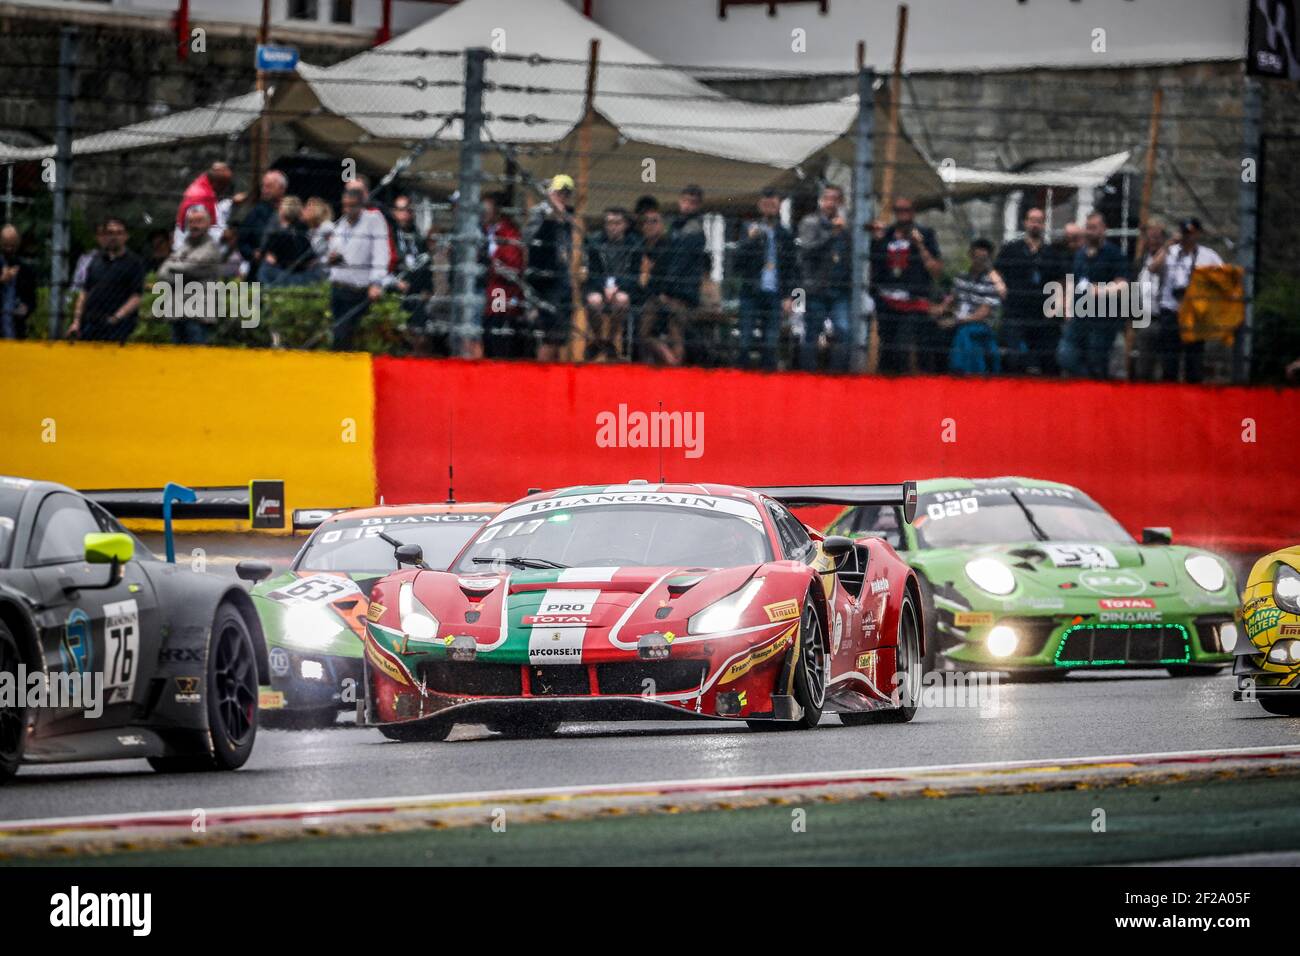 Tidlig brændt forvisning during the 2019 Blancpain Endurance Series championship 24 Hours of Spa,  from July 24 to 28, Spa Francorchamps, Belgium - Photo Frederic Le Floc'h /  DPPI Stock Photo - Alamy